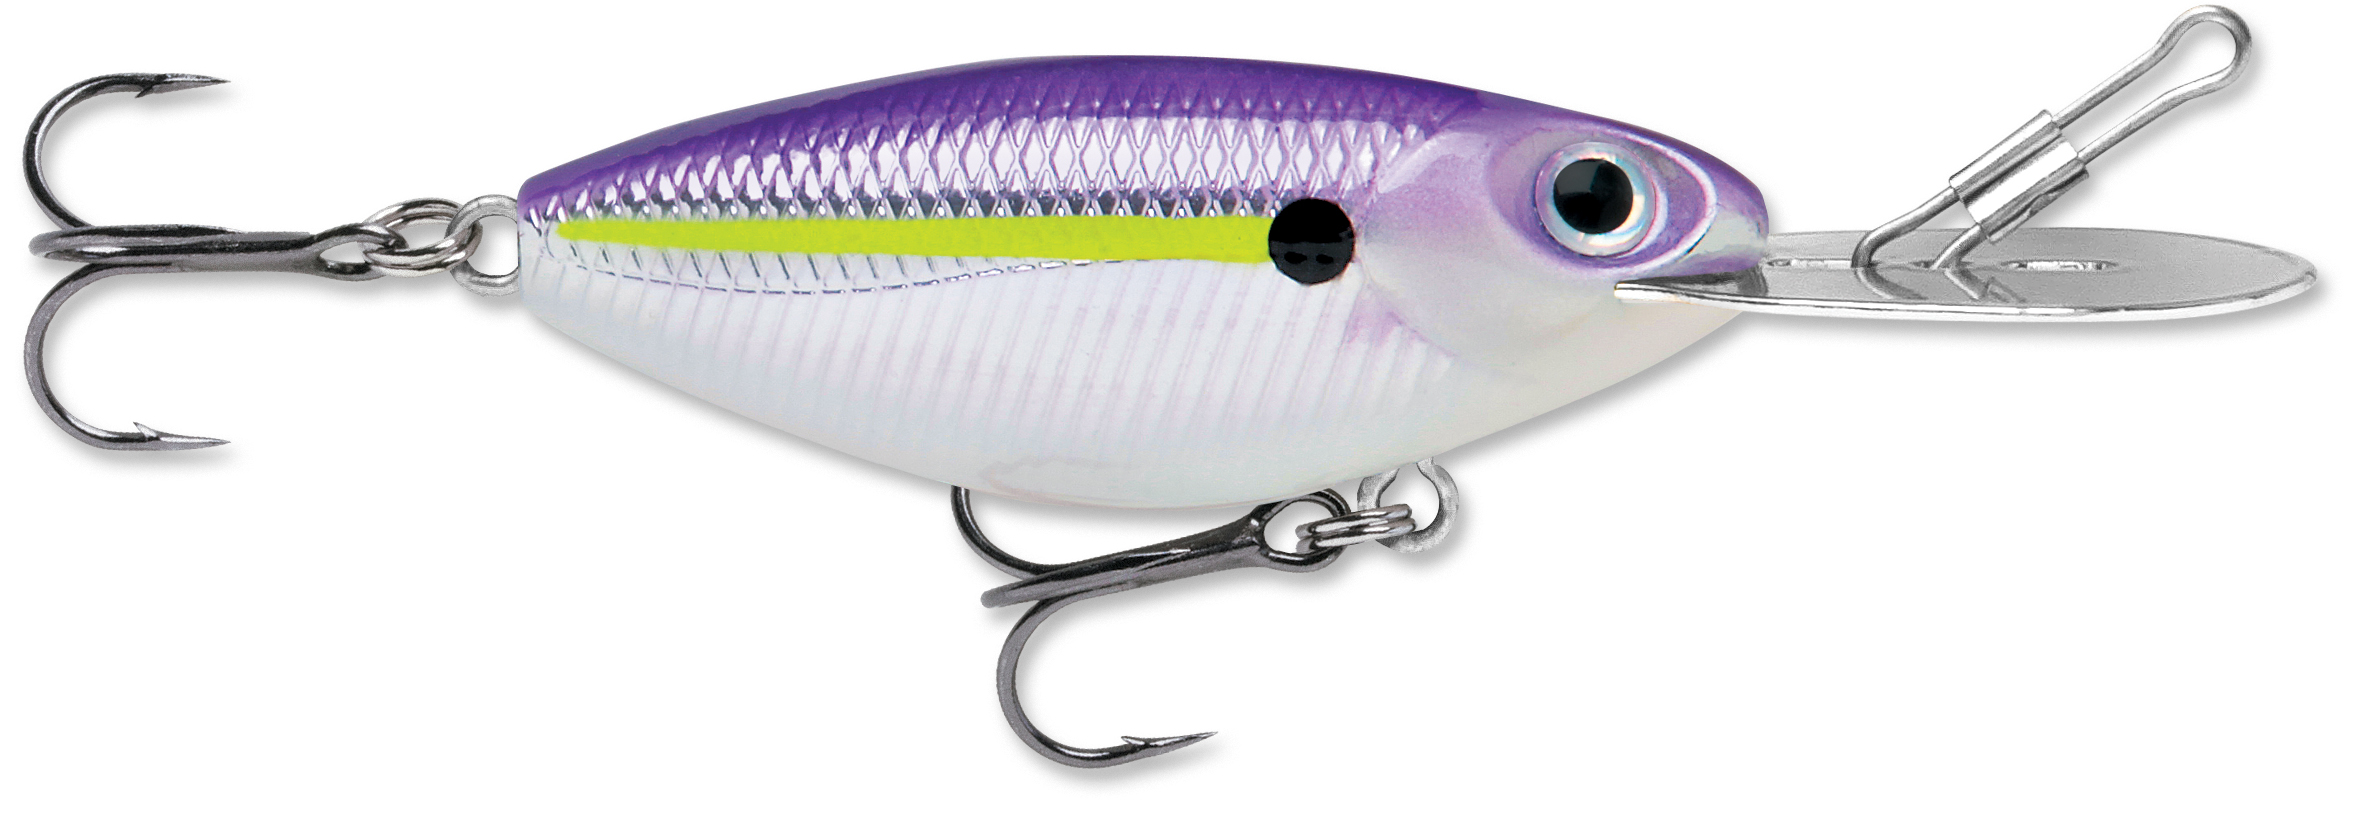 Storm Hot 'N Tot MadFlash 05 Fishing Lure, Ghost Blue UV, One Size (HM671)